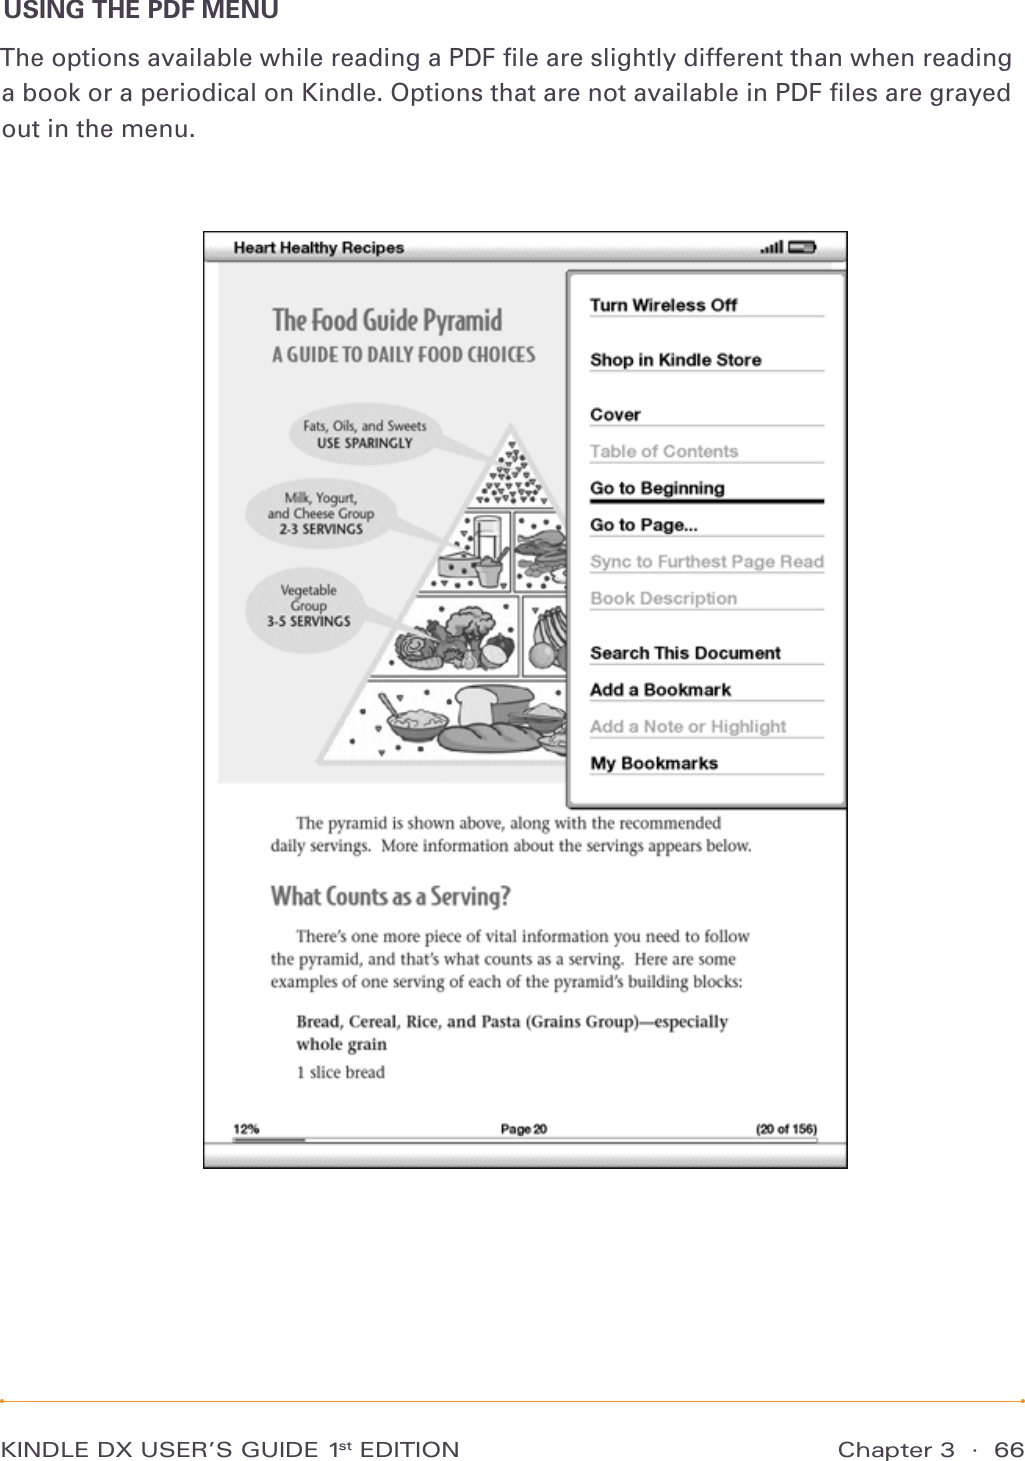 KINDLE DX USER’S GUIDE 1st EDITION Chapter 3  ·  66USING THE PDF MENUThe options available while reading a PDF ﬁle are slightly different than when reading a book or a periodical on Kindle. Options that are not available in PDF ﬁles are grayed out in the menu.